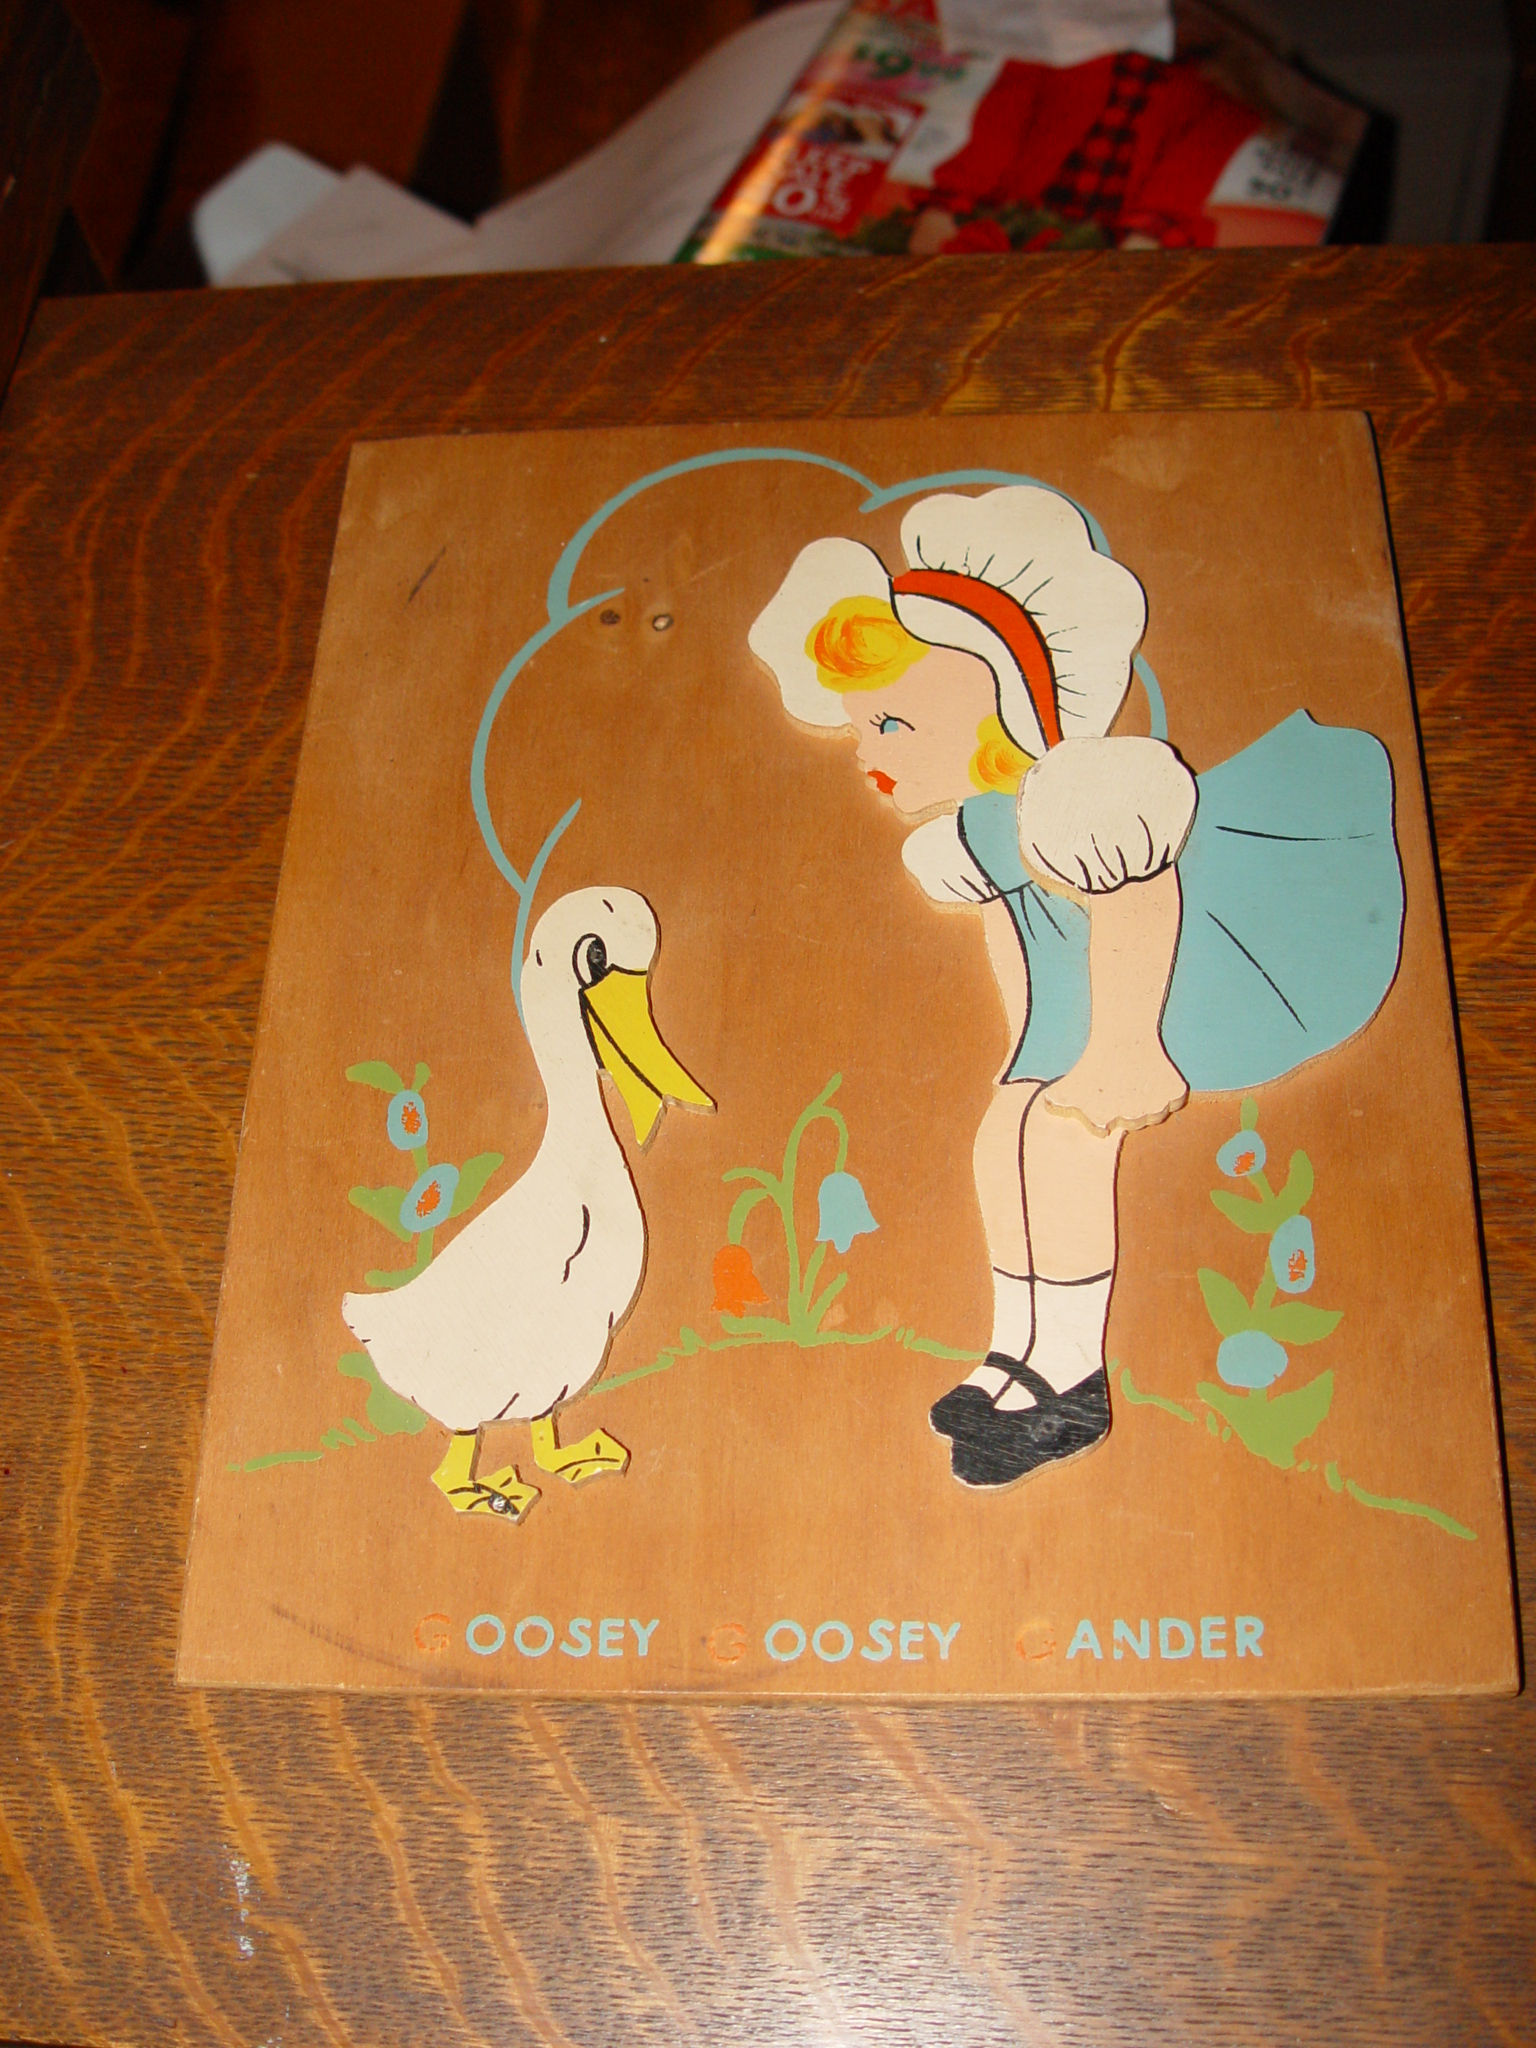 3D Vintage Goosey, Goosey
                                        Gander, wood cut out Nursery
                                        Rhyme, wall plaque